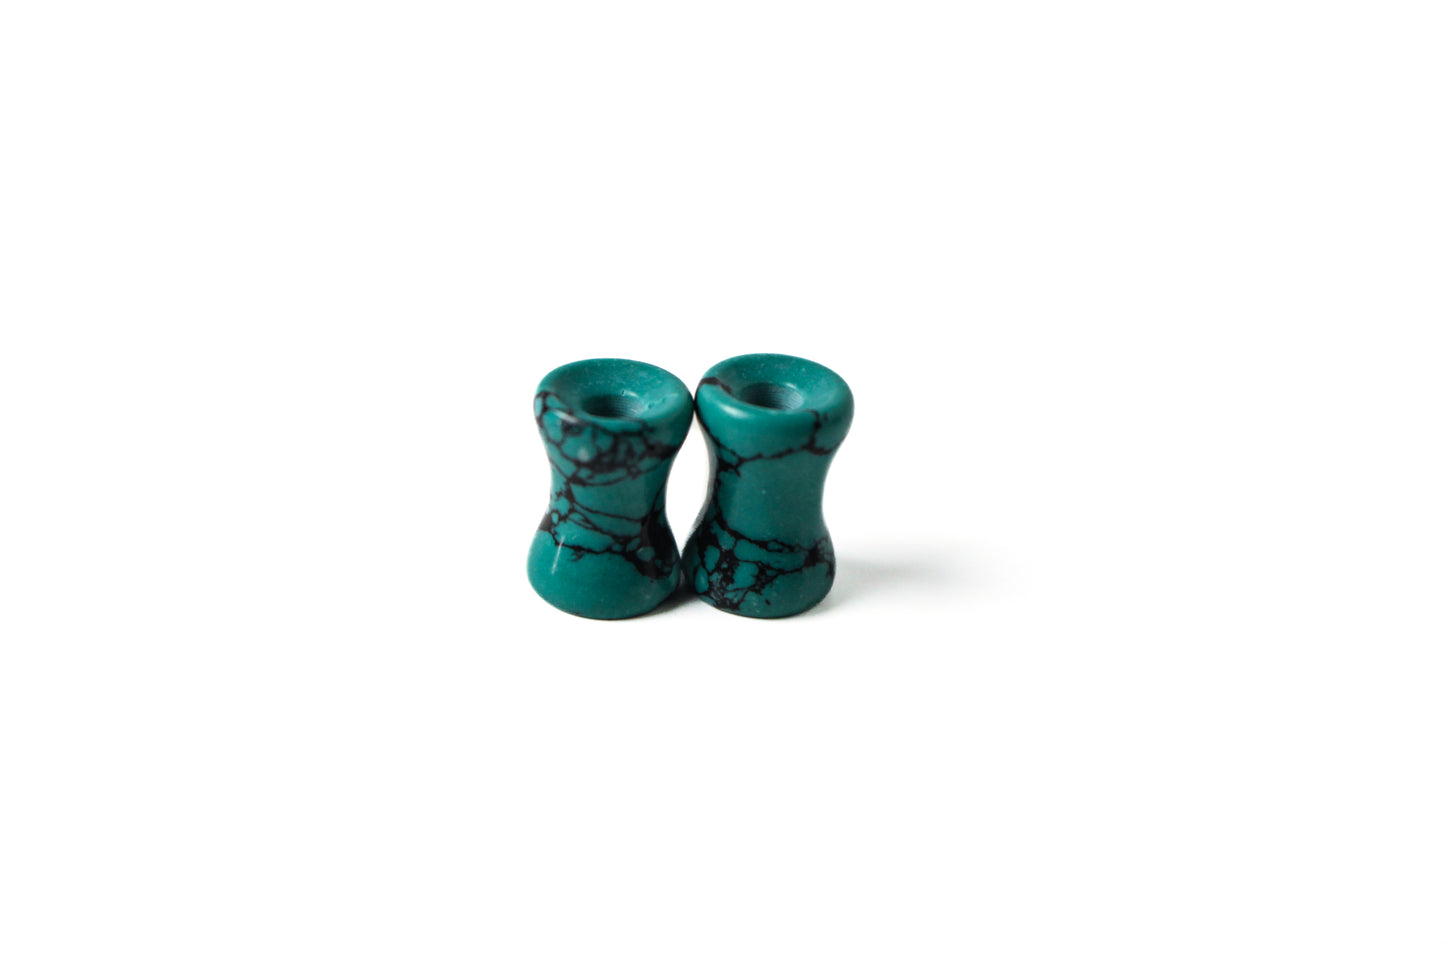 2G (6mm) - Synthetic Black and Teal Howlite Eyelets